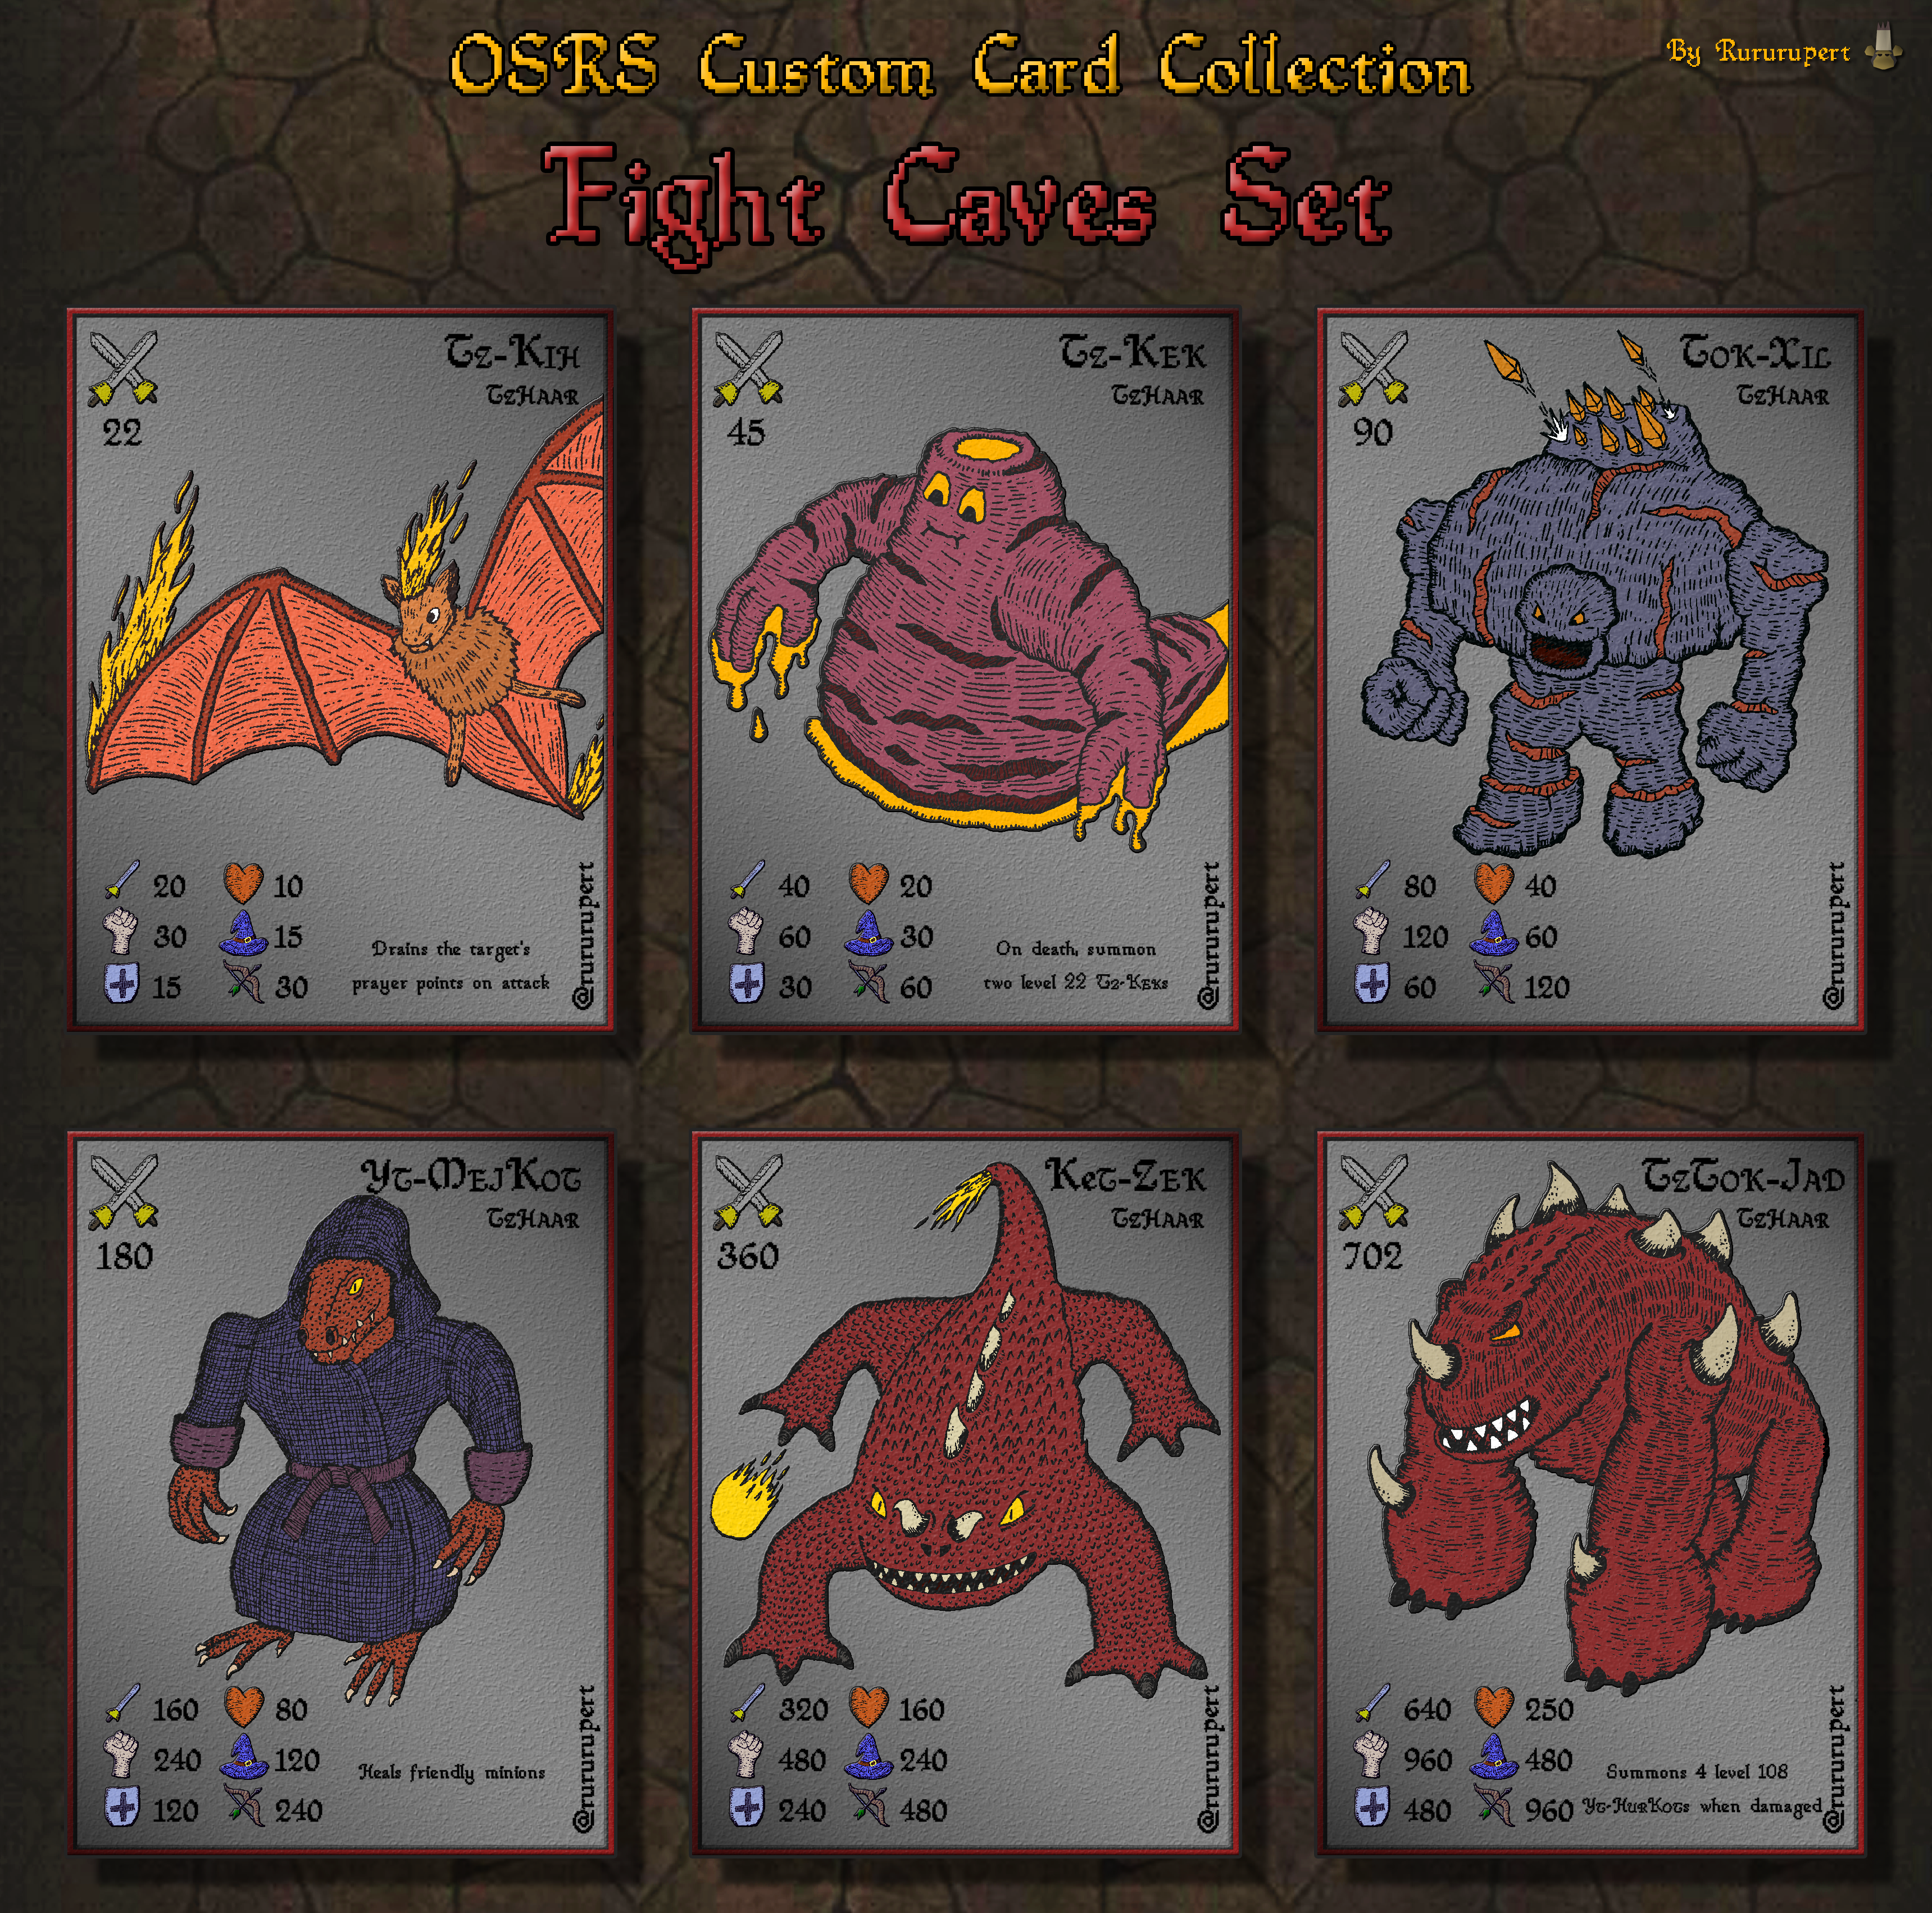 OSRS Custom Card Collection